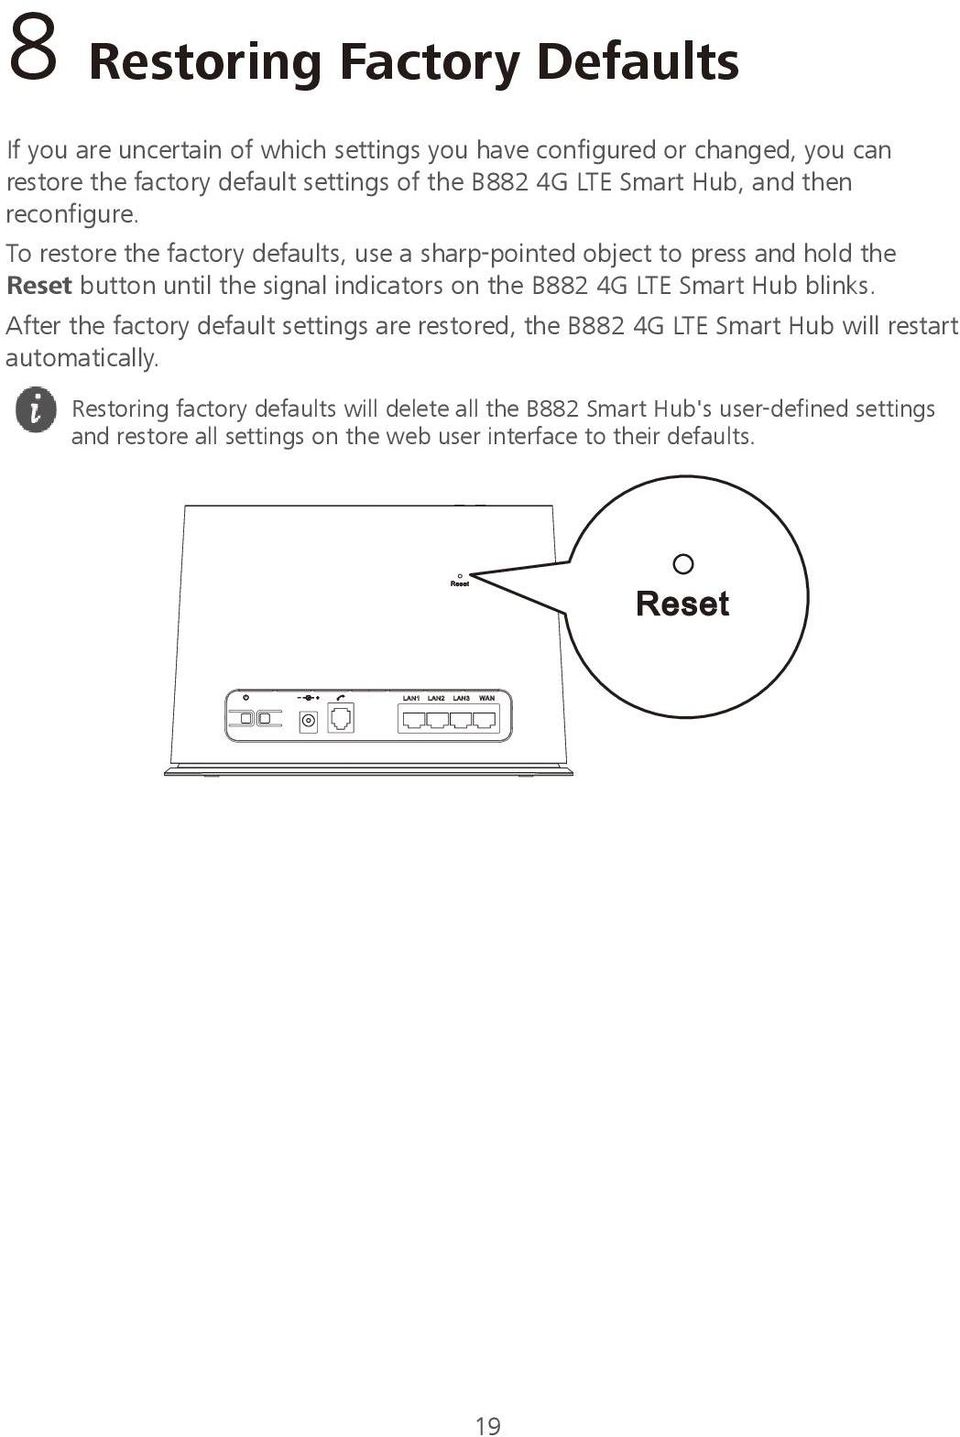 To restore the factory defaults, use a sharp-pointed object to press and hold the Reset button until the signal indicators on the B882 4G LTE Smart Hub